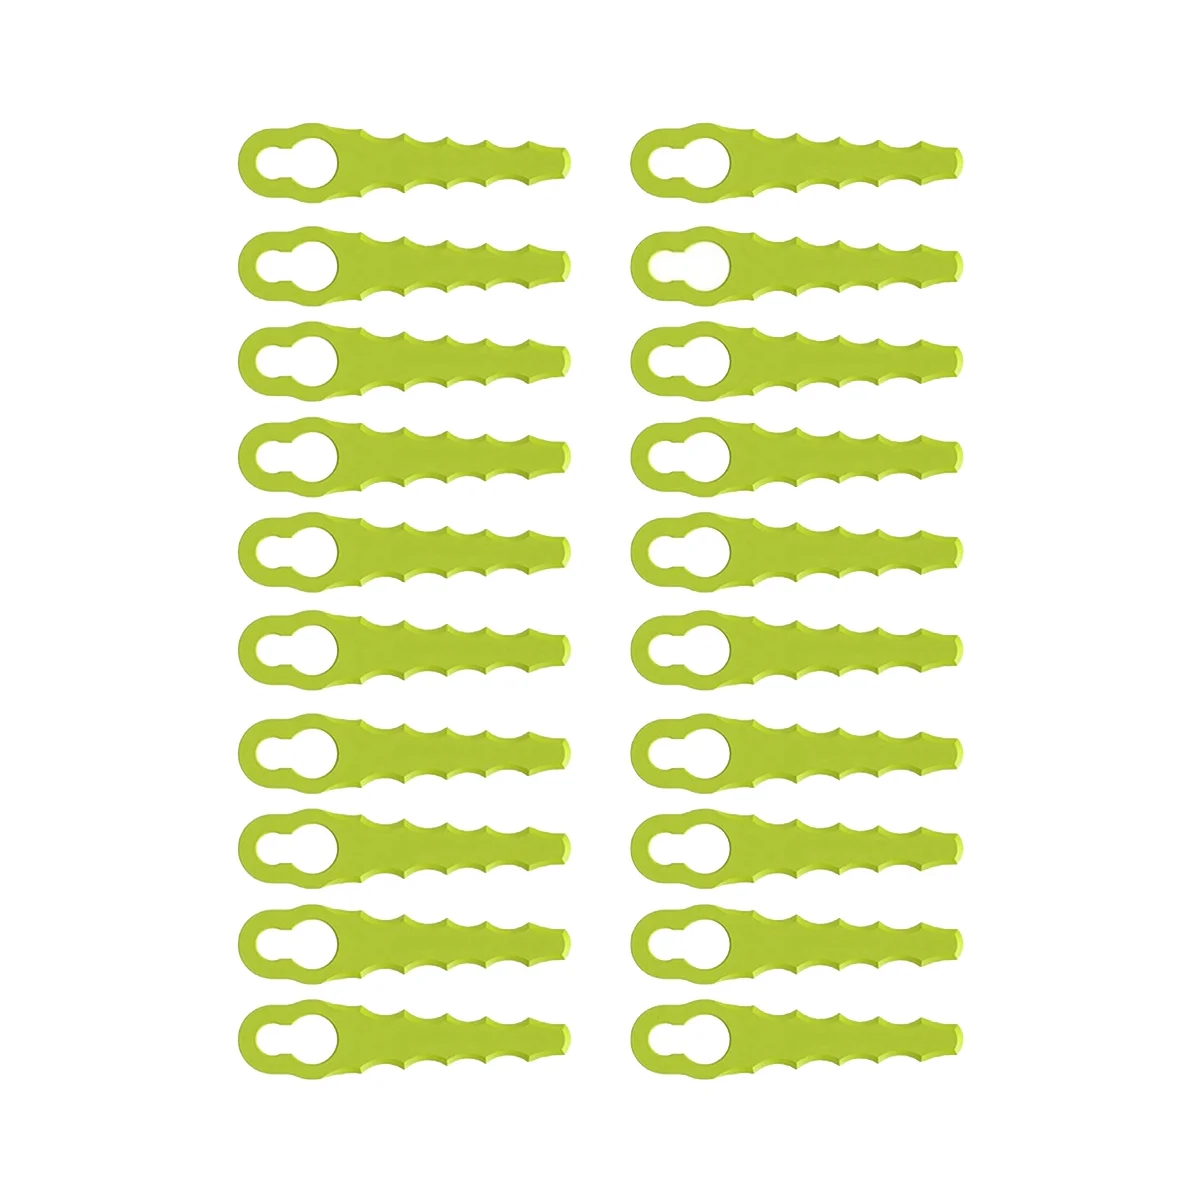 

20 Pieces Lawn Mower Replacement Plastic Lawn Mower Blades Plastic Lawn Mower Blades for Many Occasions